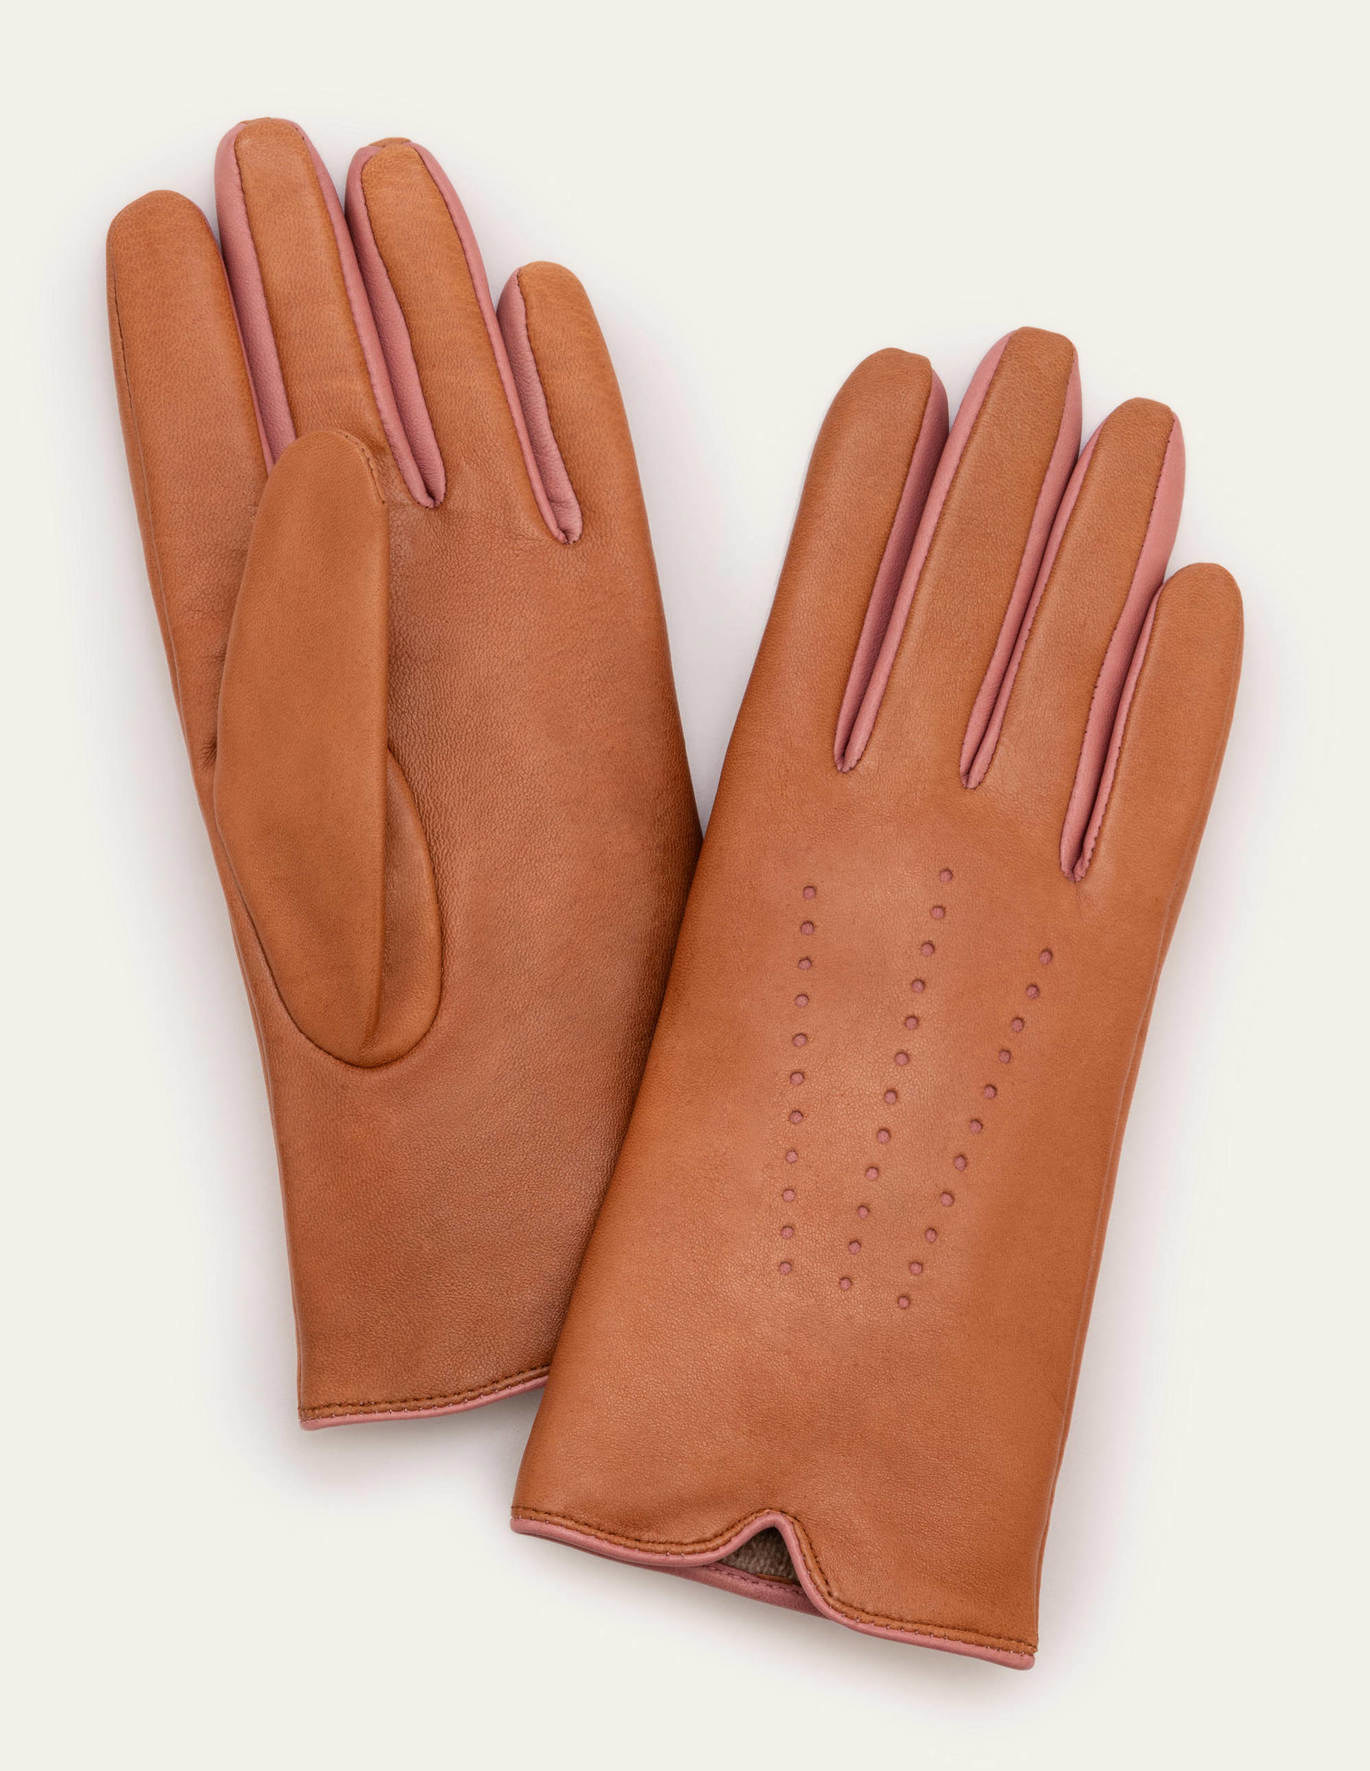 the camel colored leather gloves